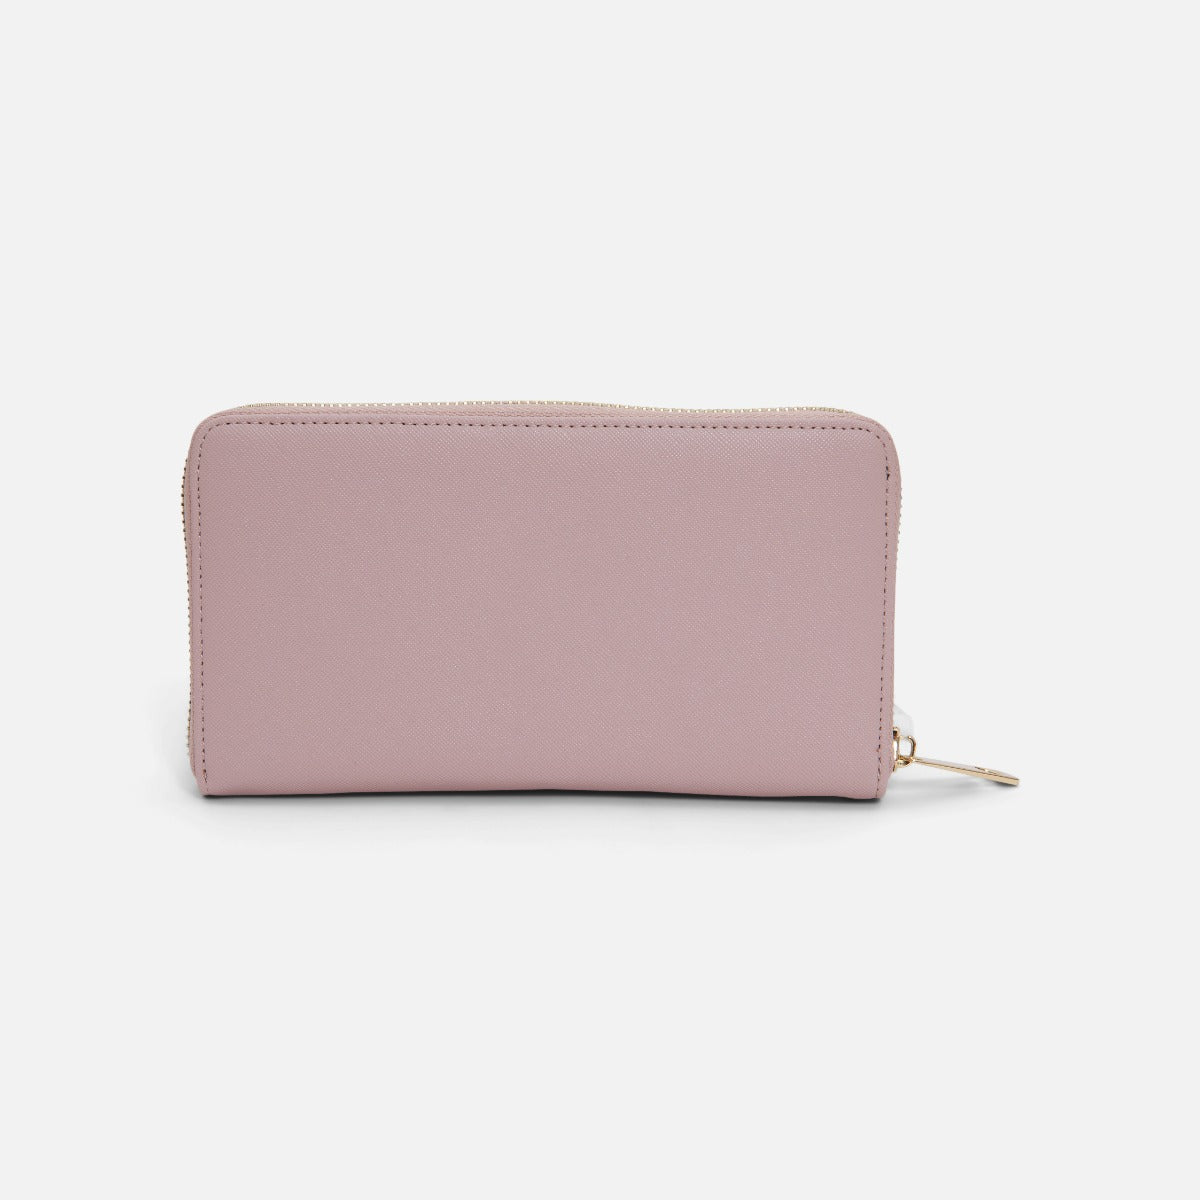 Light pink wallet with floral print and front pocket for cards 